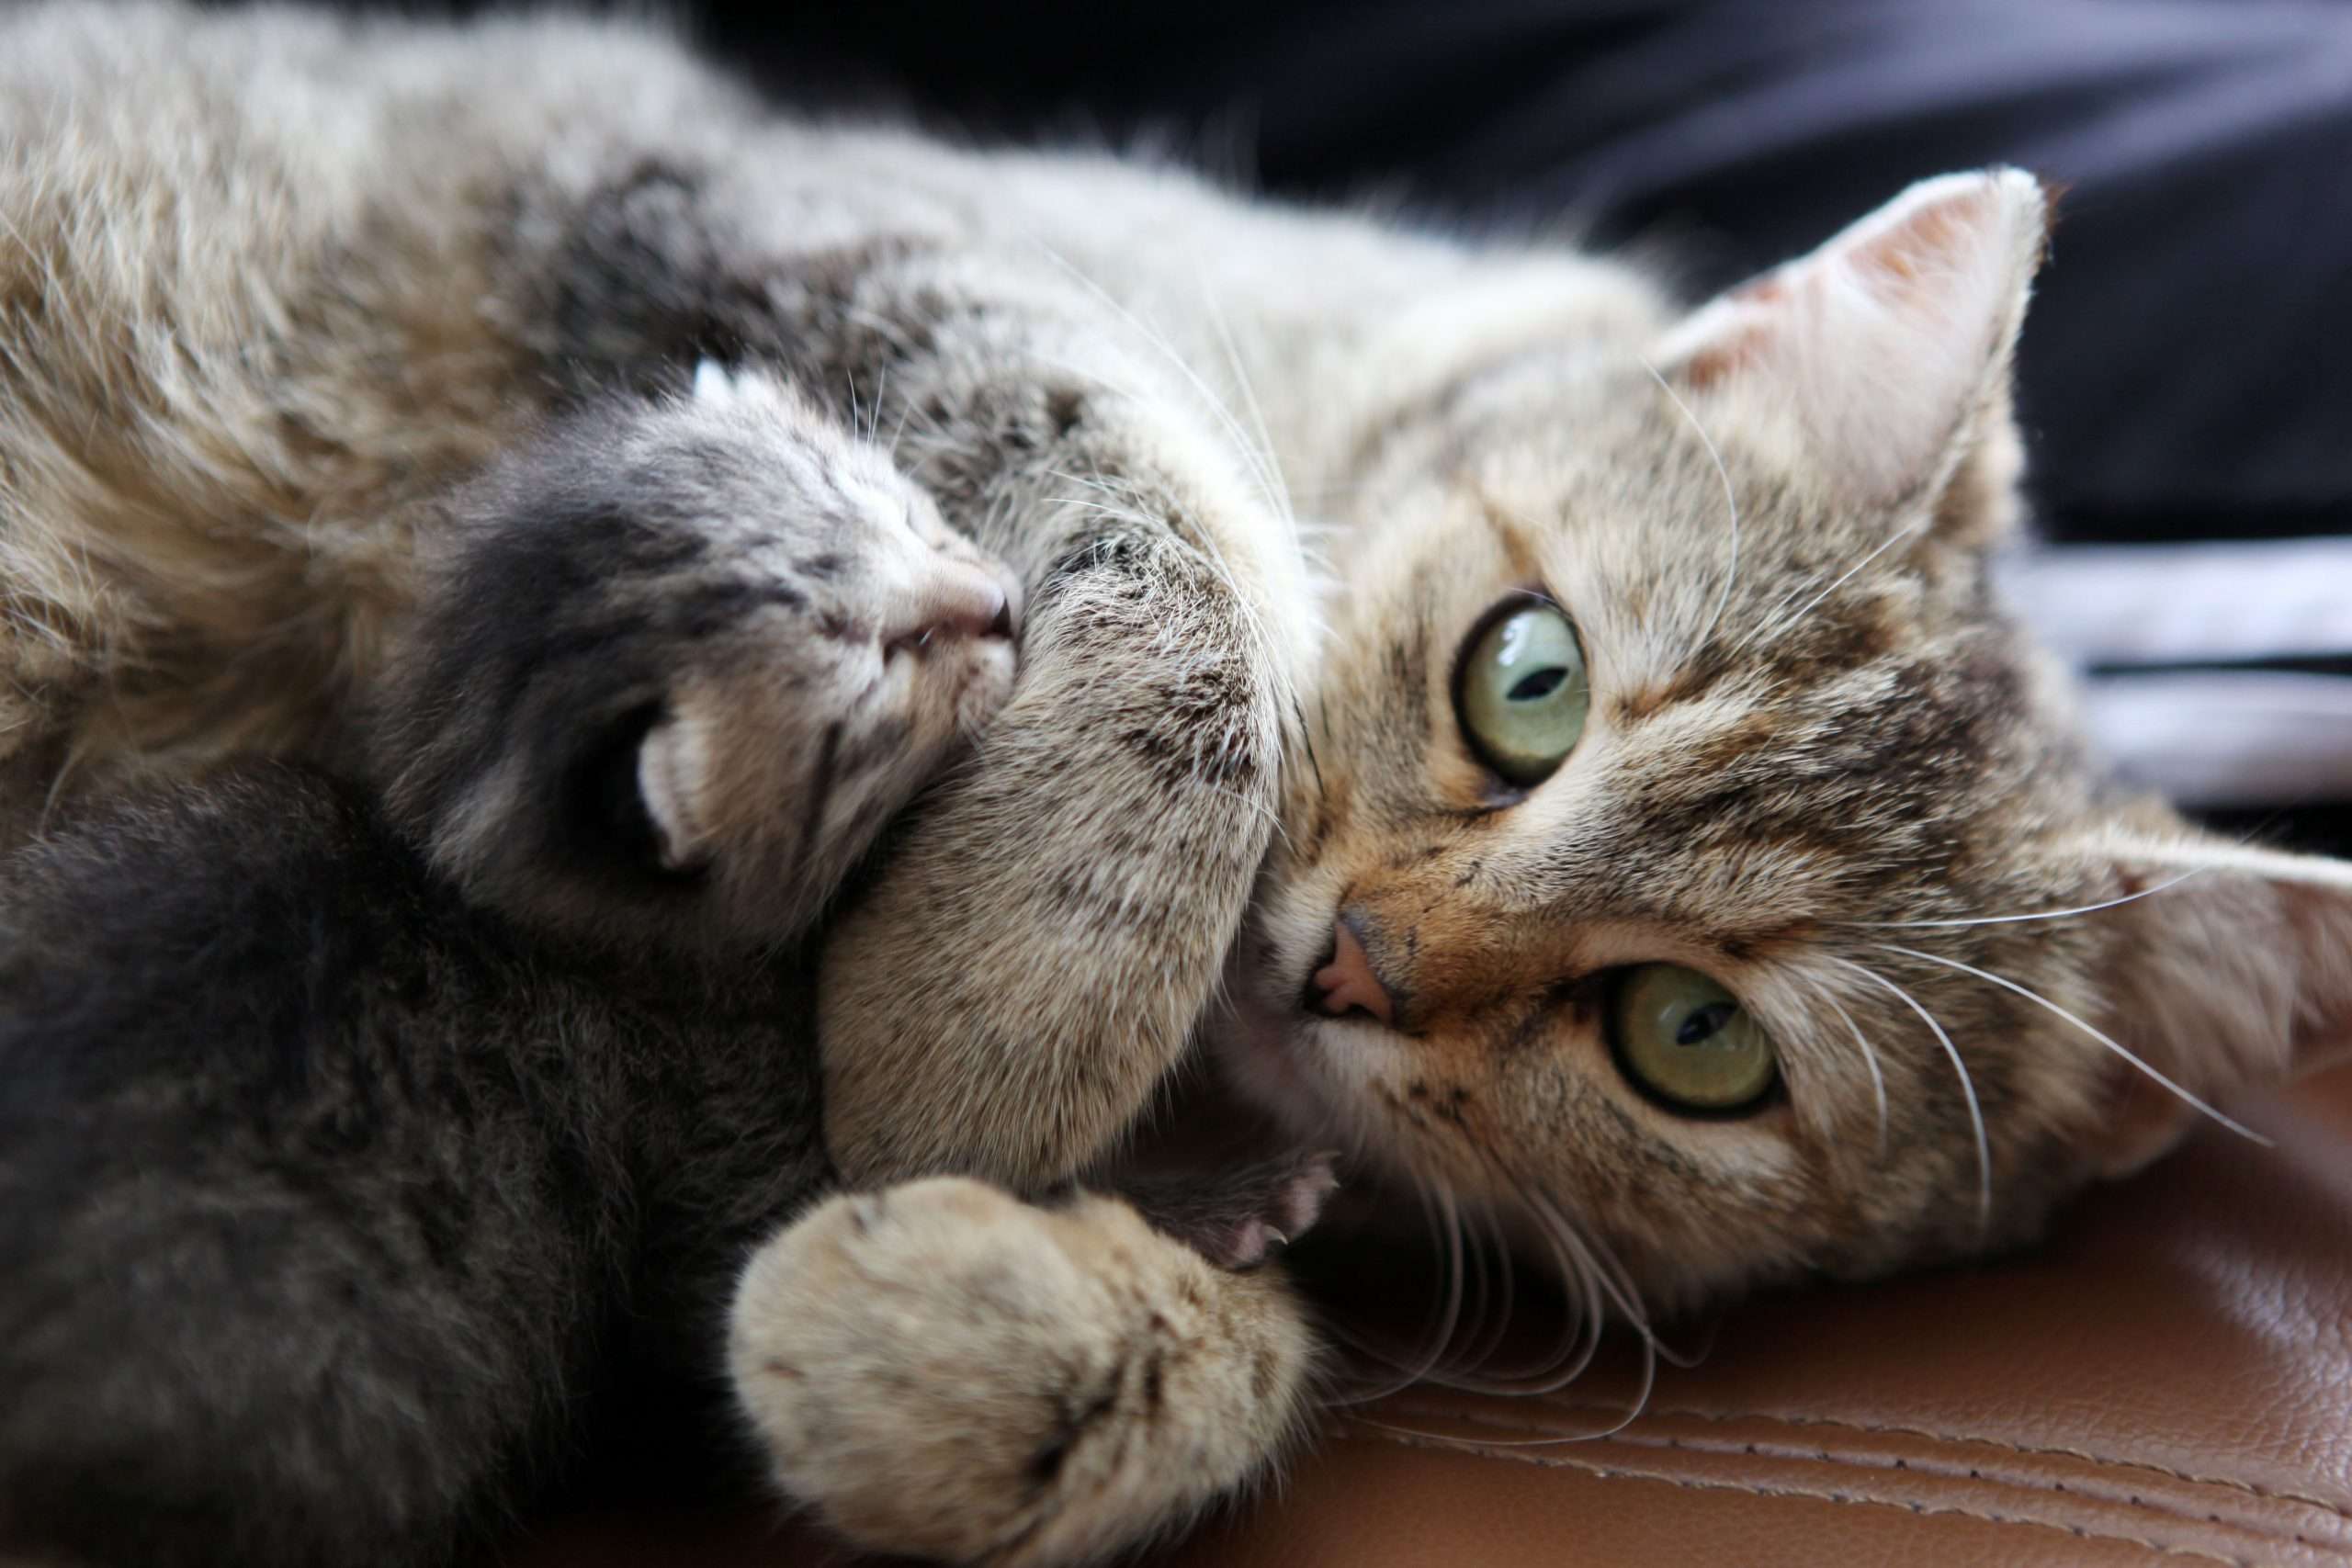 How Long Should a Kitten Stay With Its Mother?